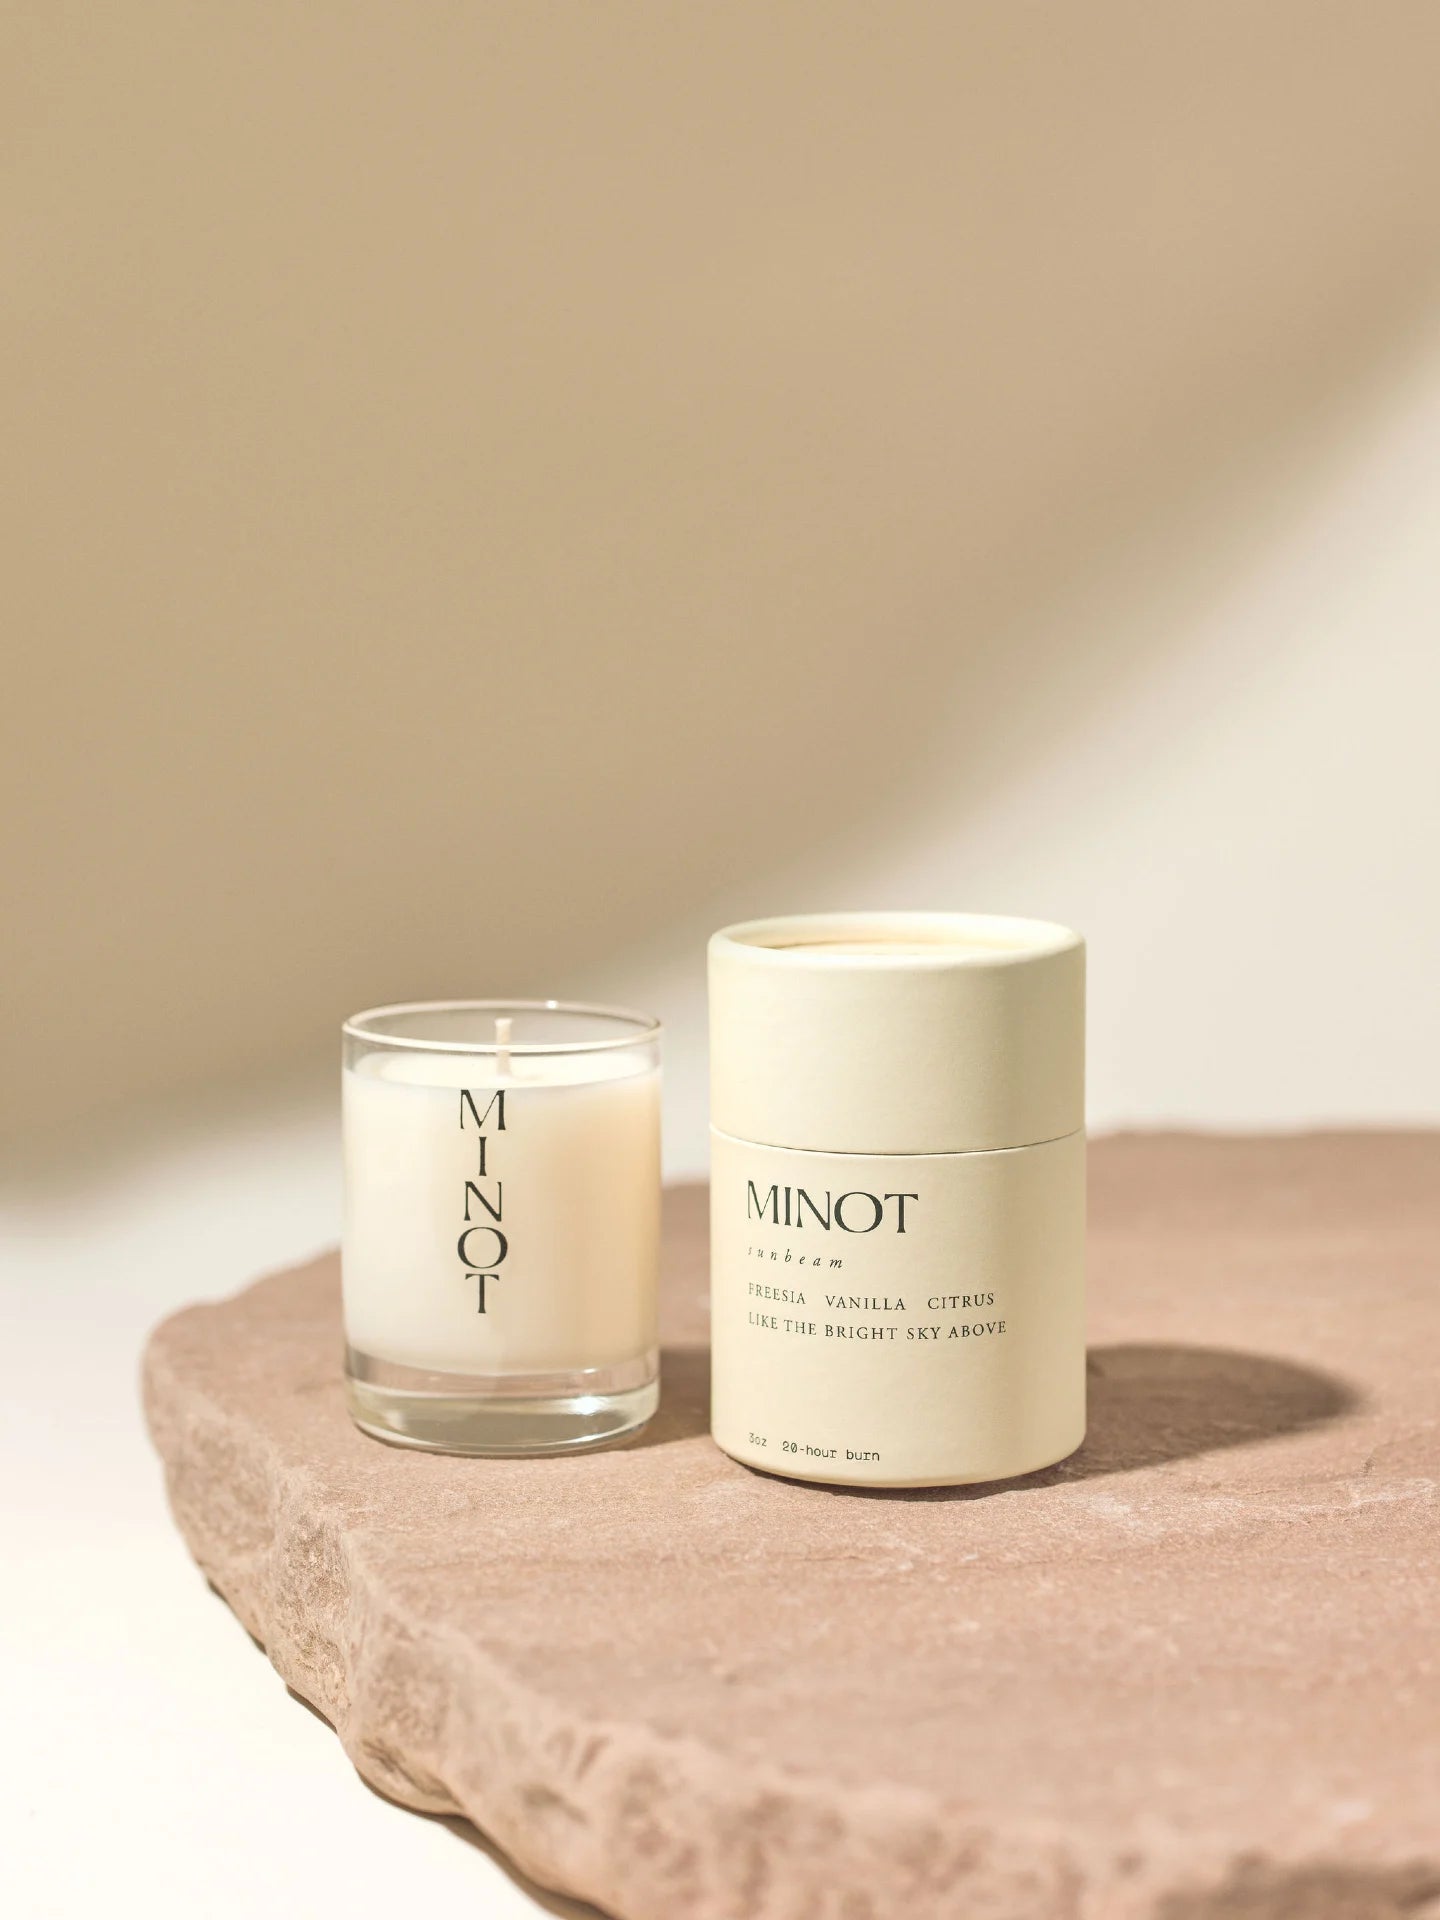 The Sunbeam Mini is a non-toxic, clean-burning soy travel candle with freesia, vanilla, and citrus